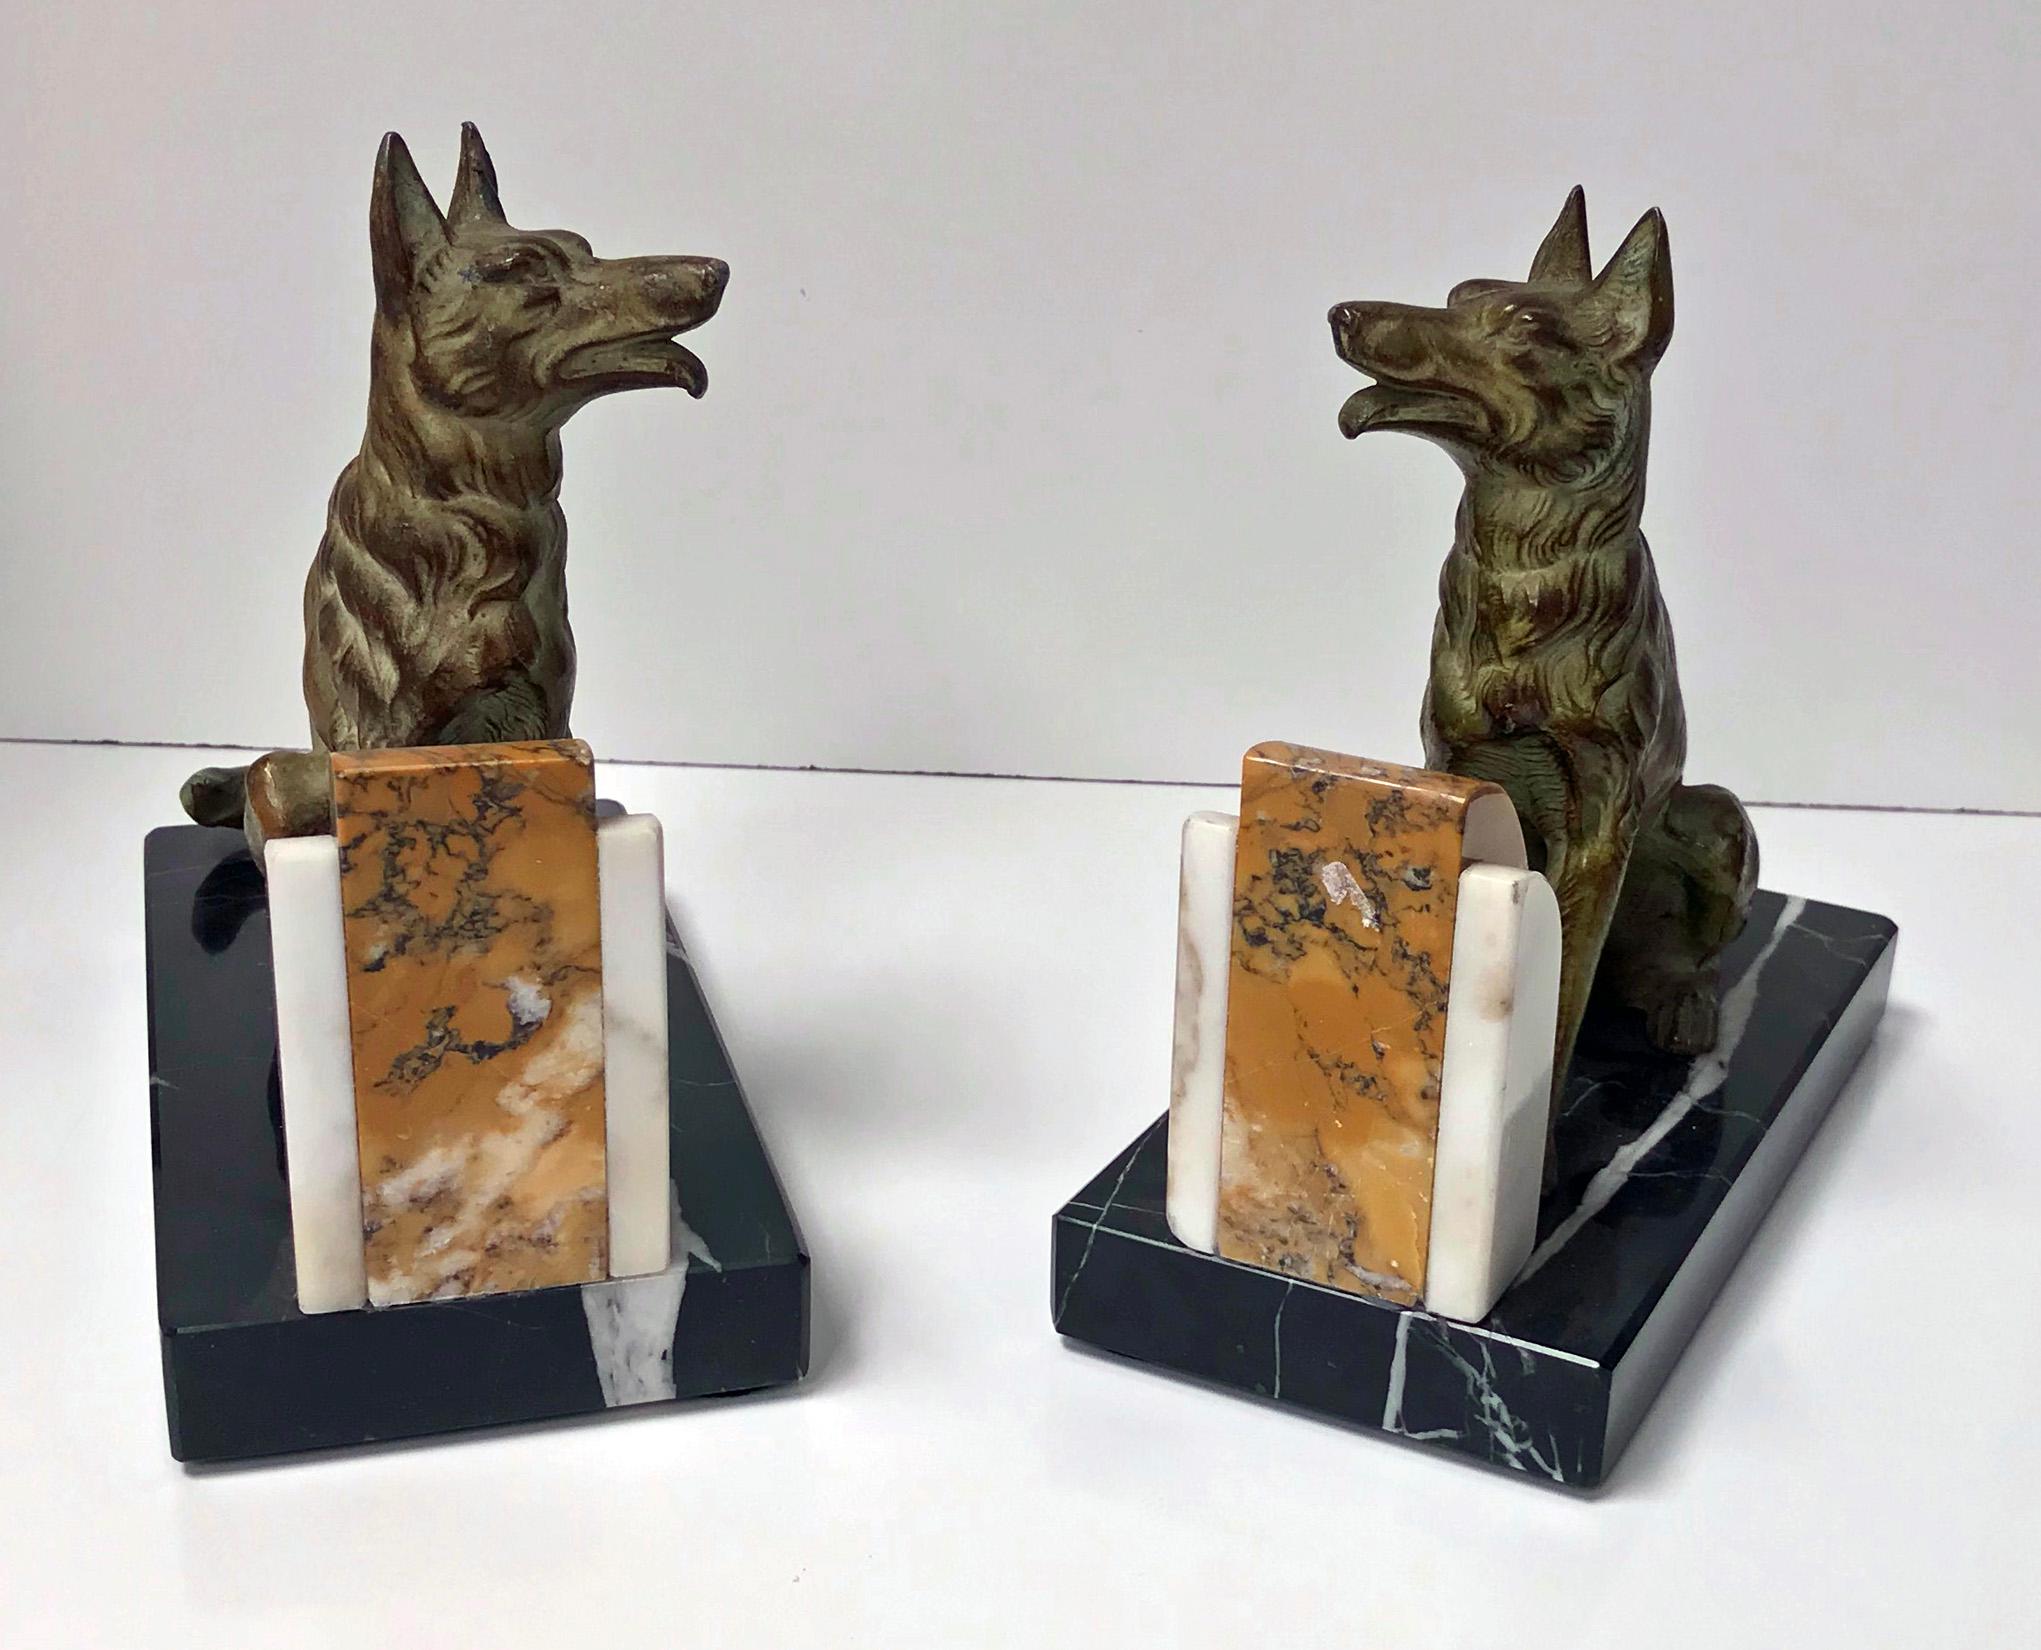 Pair of Art Deco patinated bronze dog bookends, France, circa 1930. Each depicting an Alsatian Dog on black and white marble base. The standing Alsatian of realistic model form, textured body; seated in front of mottled light brown and cream hemi